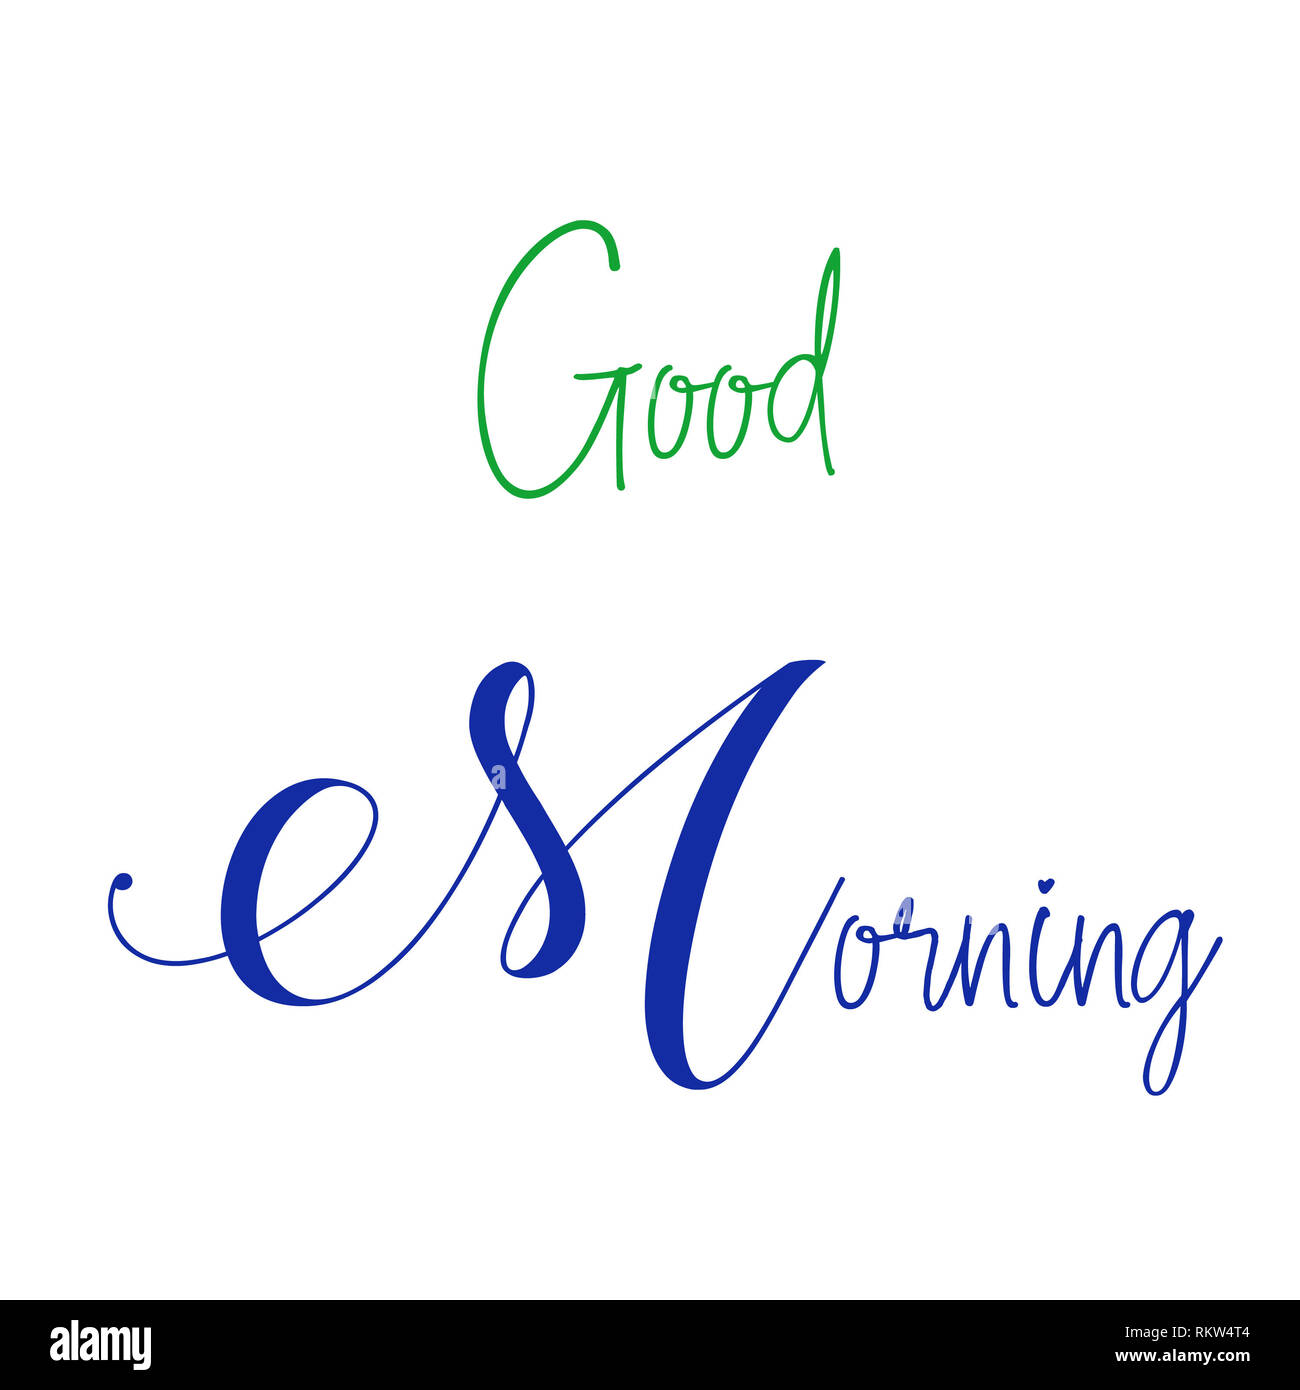 Good morning wishes and greetings Stock Photo - Alamy